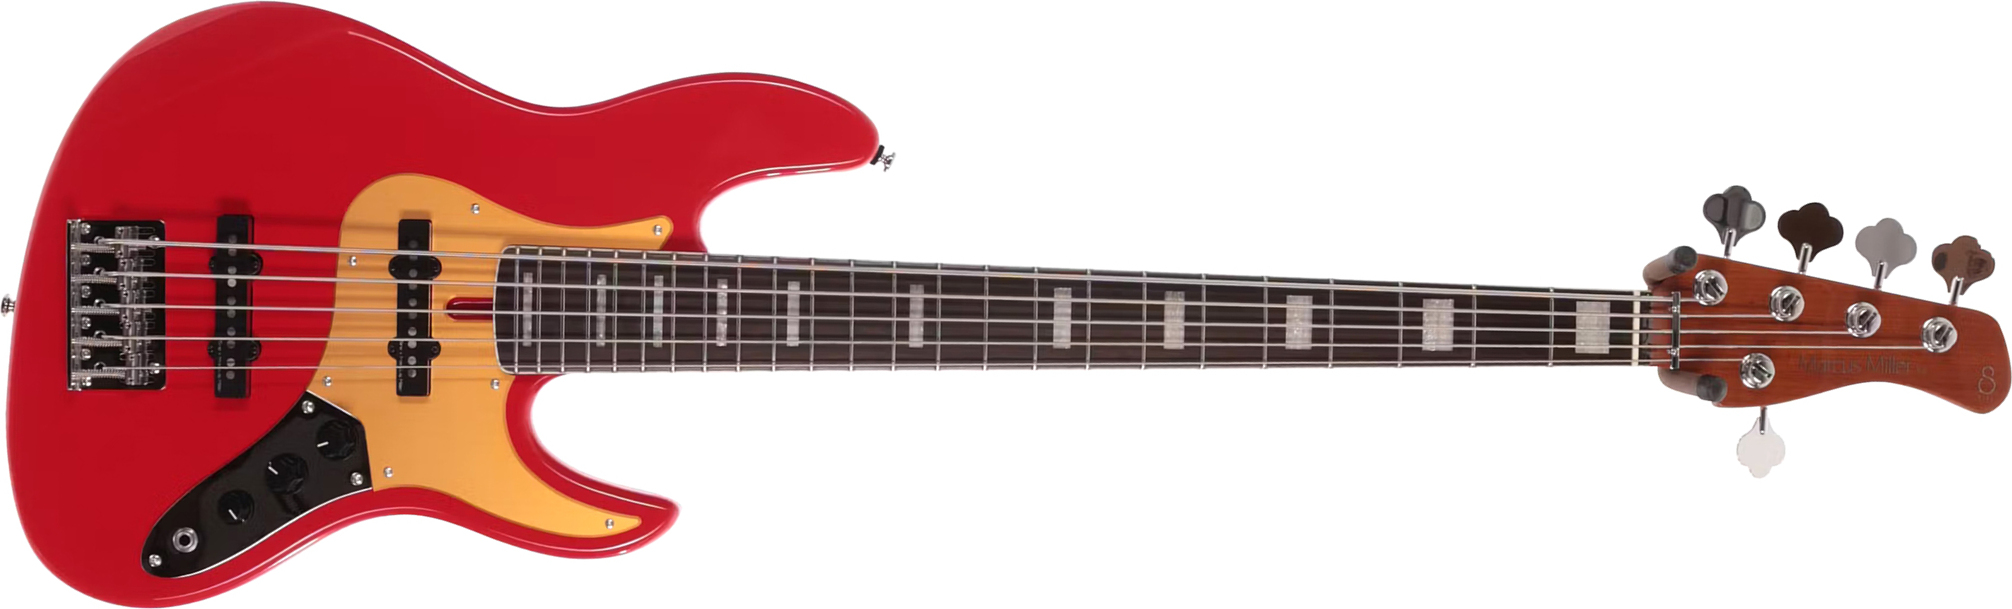 Marcus Miller V5 24 Fret 5st 5c Rw - Dakota Red - Solid body electric bass - Main picture